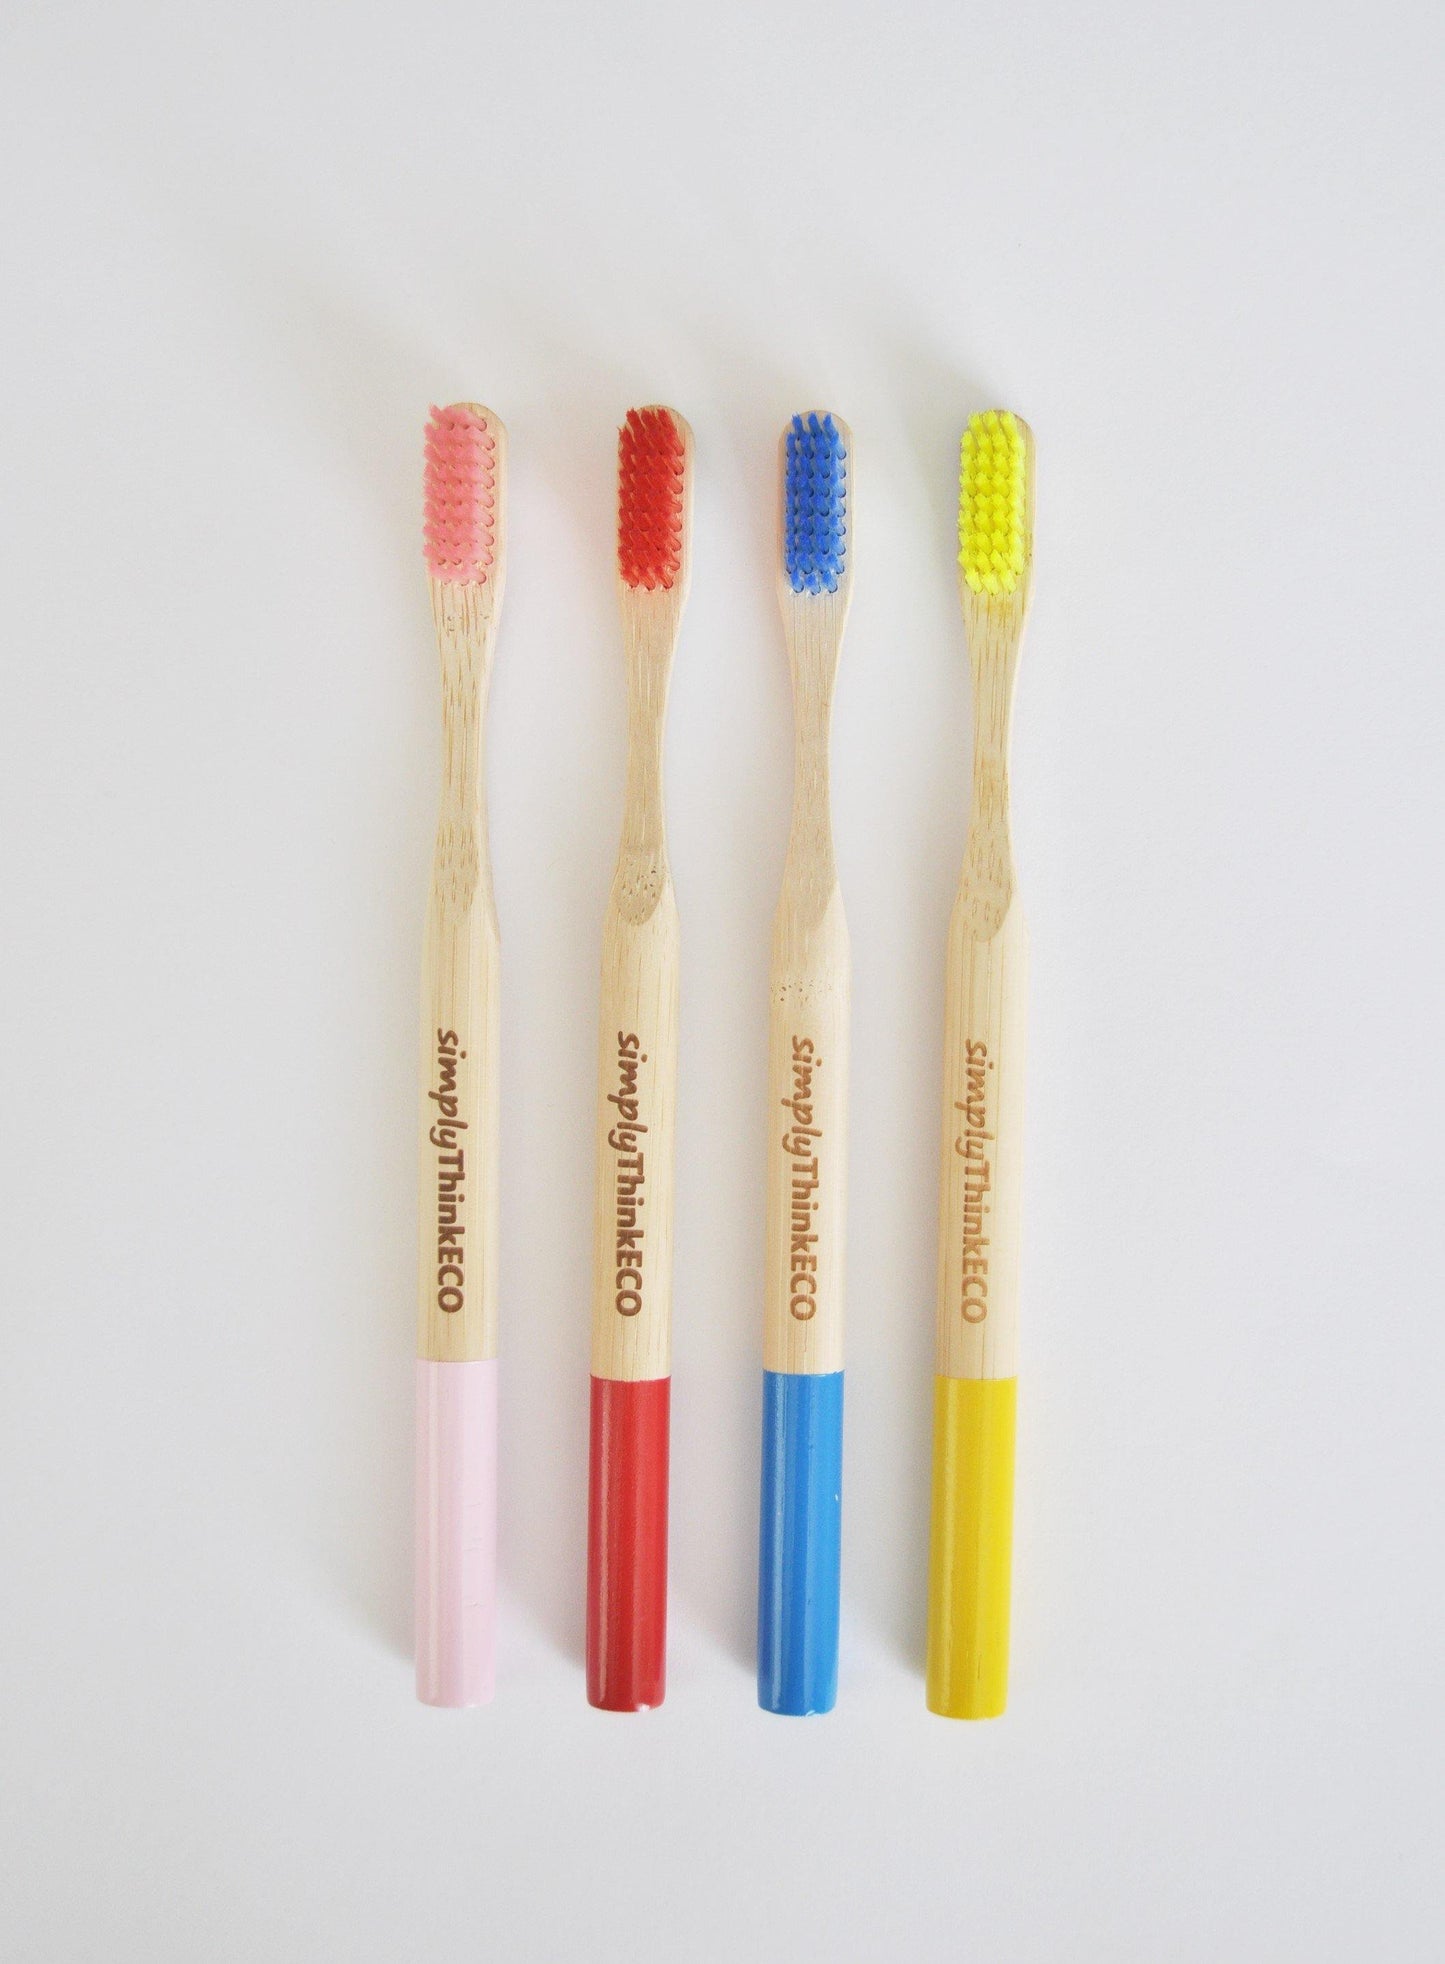 Four Adult Biodegradable Bamboo Toothbrush - Round - Zero Waste Eco Friendly Plastic Free Natural Bamboo Brush - Soft Bristle - simplyThinkECO